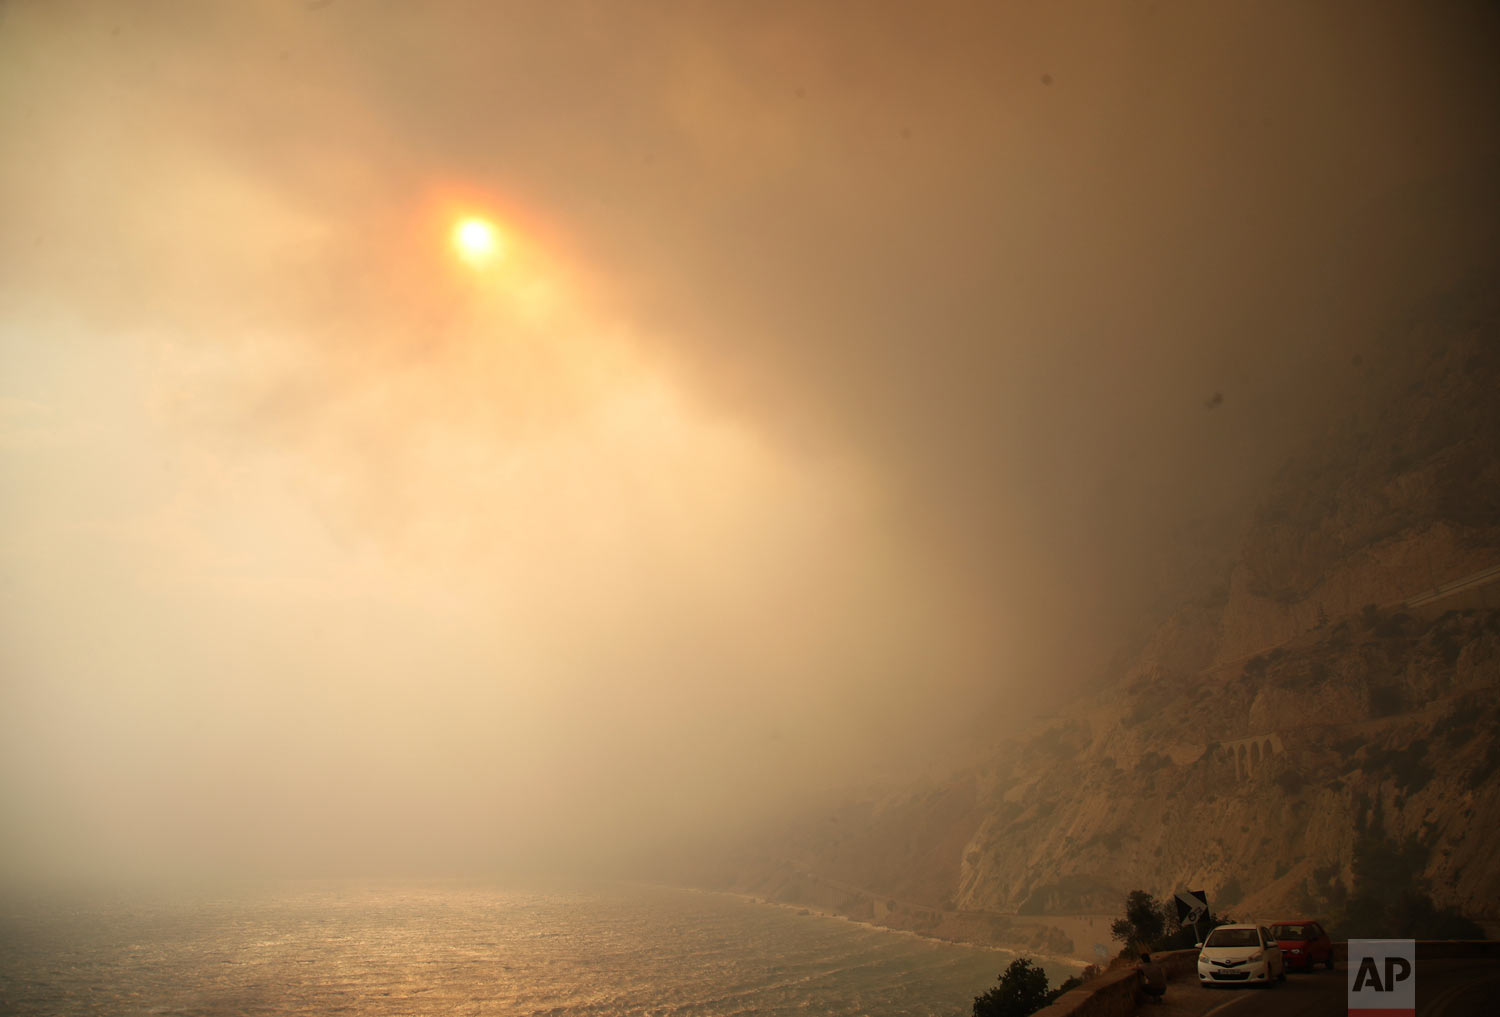  The sun breaks through a smoked-filled sky as cars drive on a road near Kineta, west of Athens, Monday, July 23, 2018. As of Friday, at least 86 people have been killed in the wildfires near the capital. (AP Photo/Thanassis Stavrakis) 